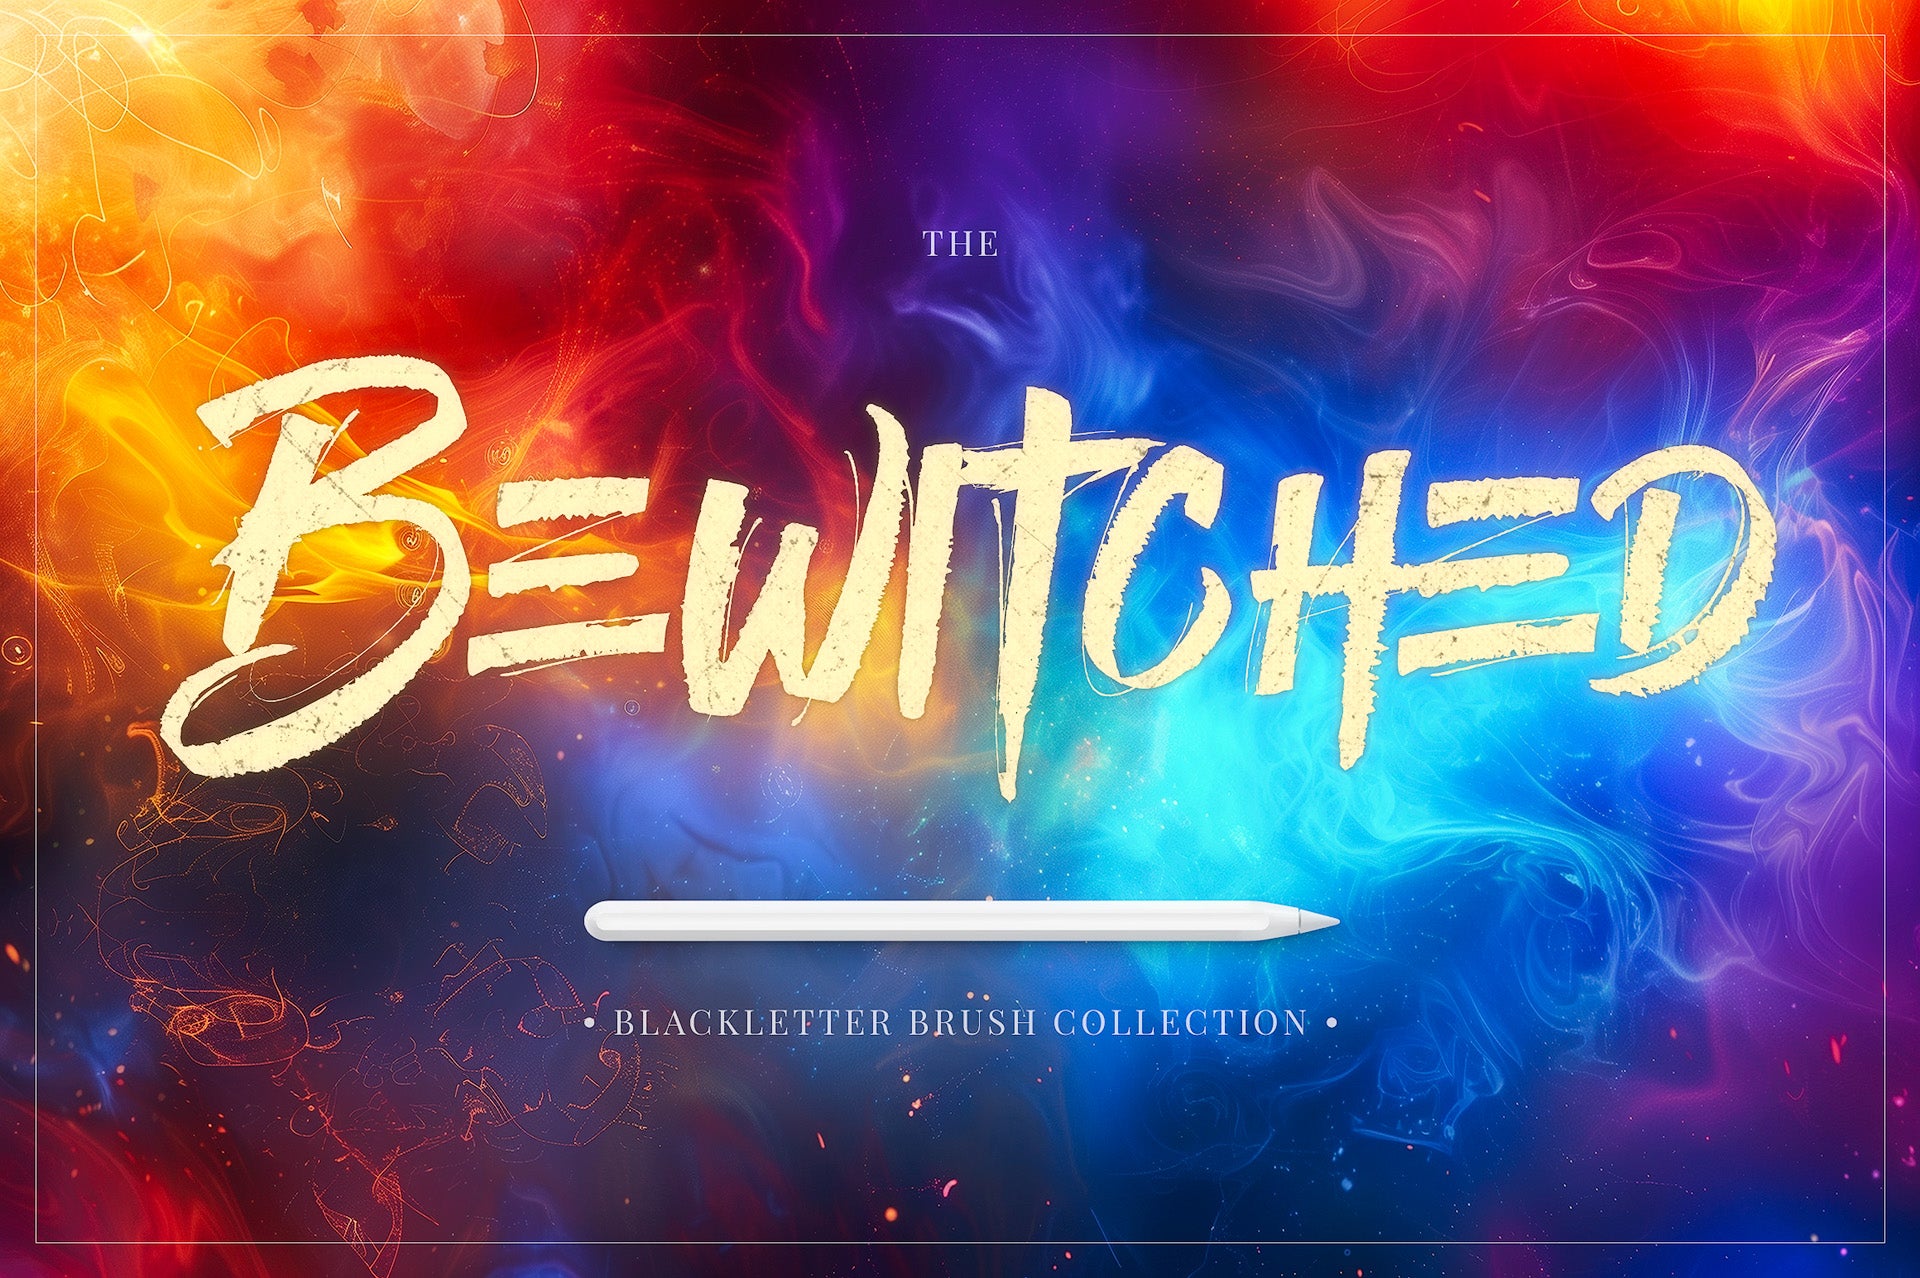 The Bewitched Blackletter Brush Collection